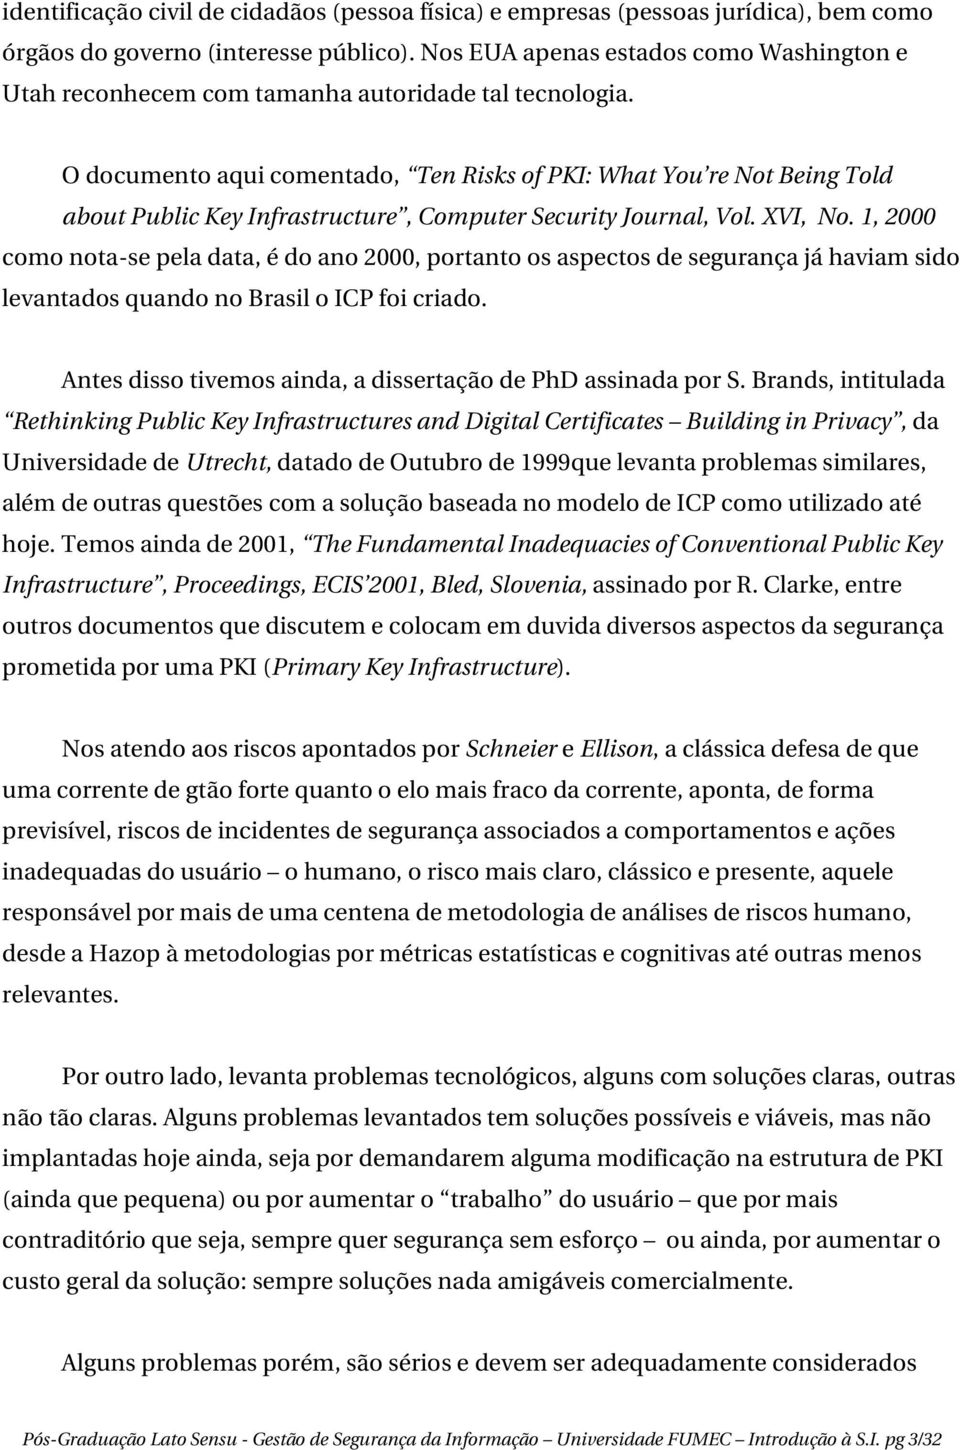 O documento aqui comentado, Ten Risks of PKI: What You re Not Being Told about Public Key Infrastructure, Computer Security Journal, Vol. XVI, No.